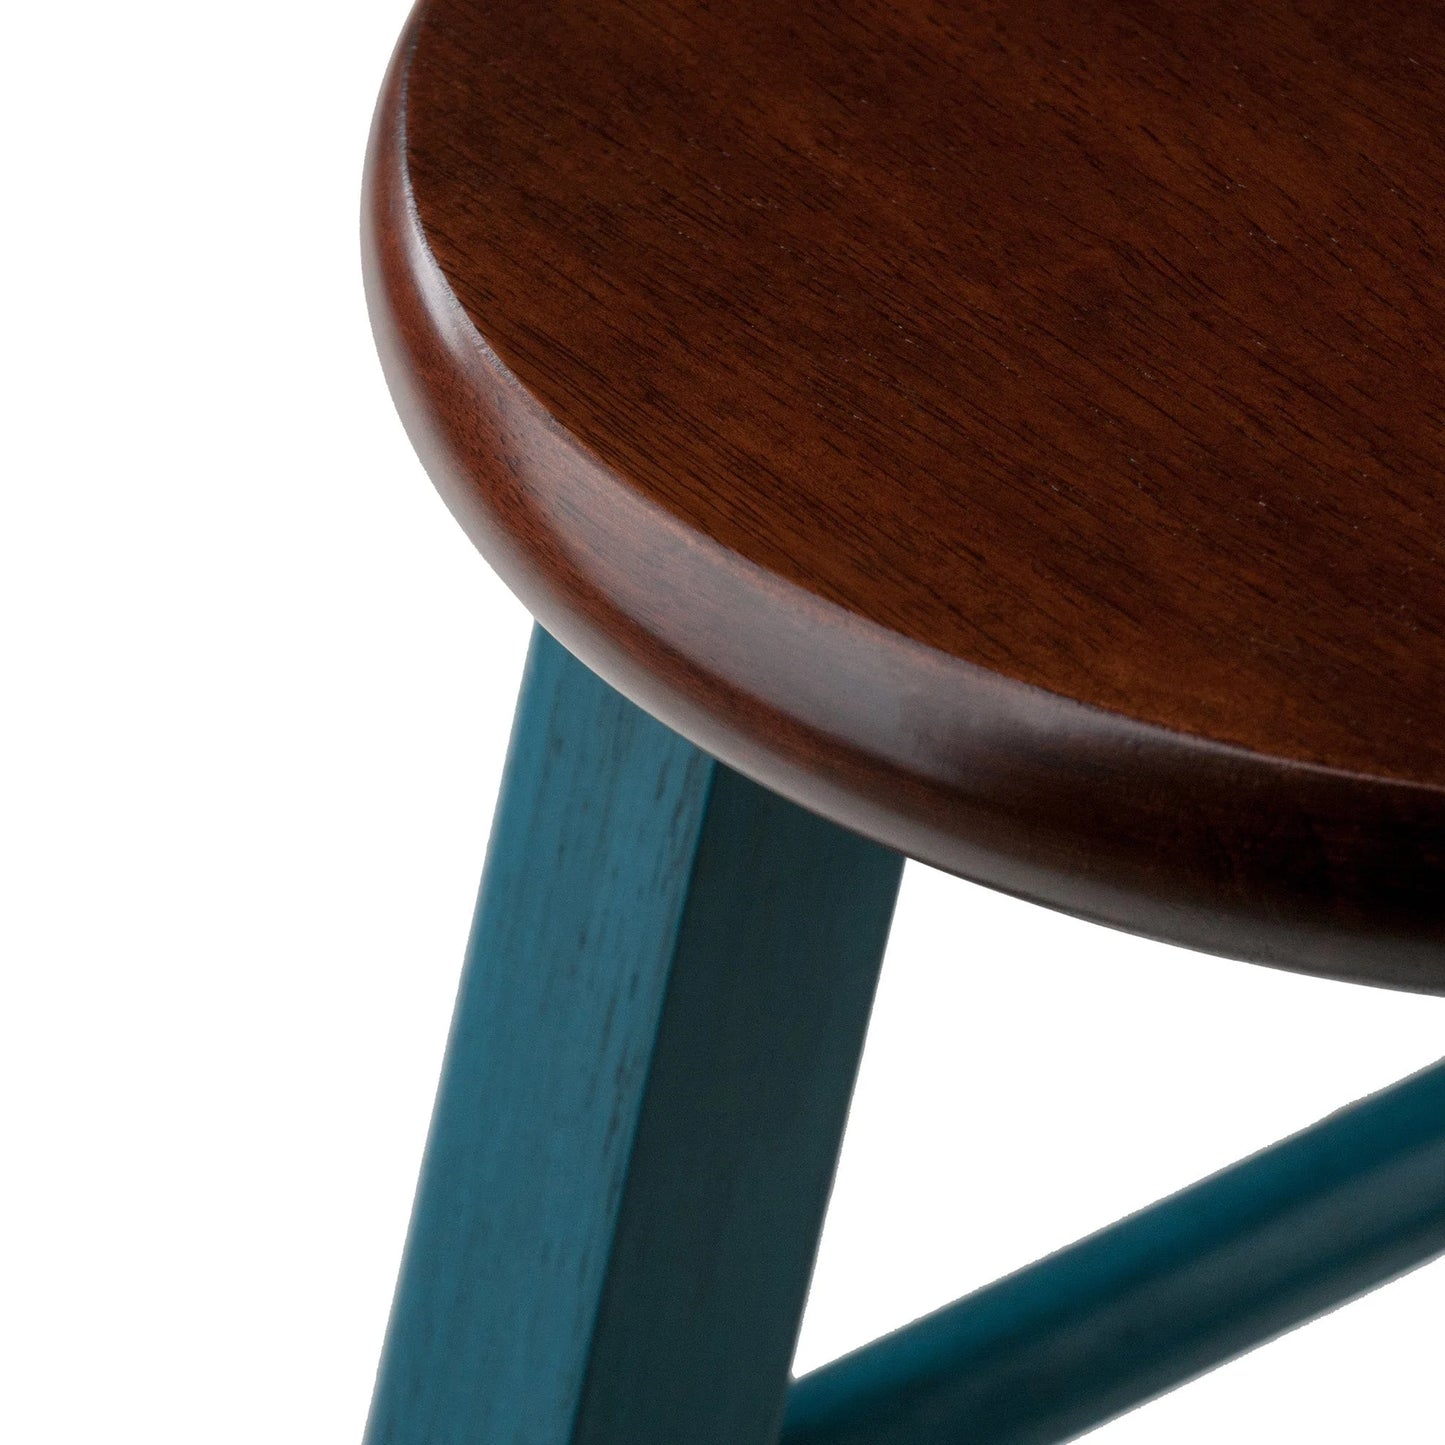 WINSOME Stool Ivy Counter Stool, Rustic Teal and Walnut